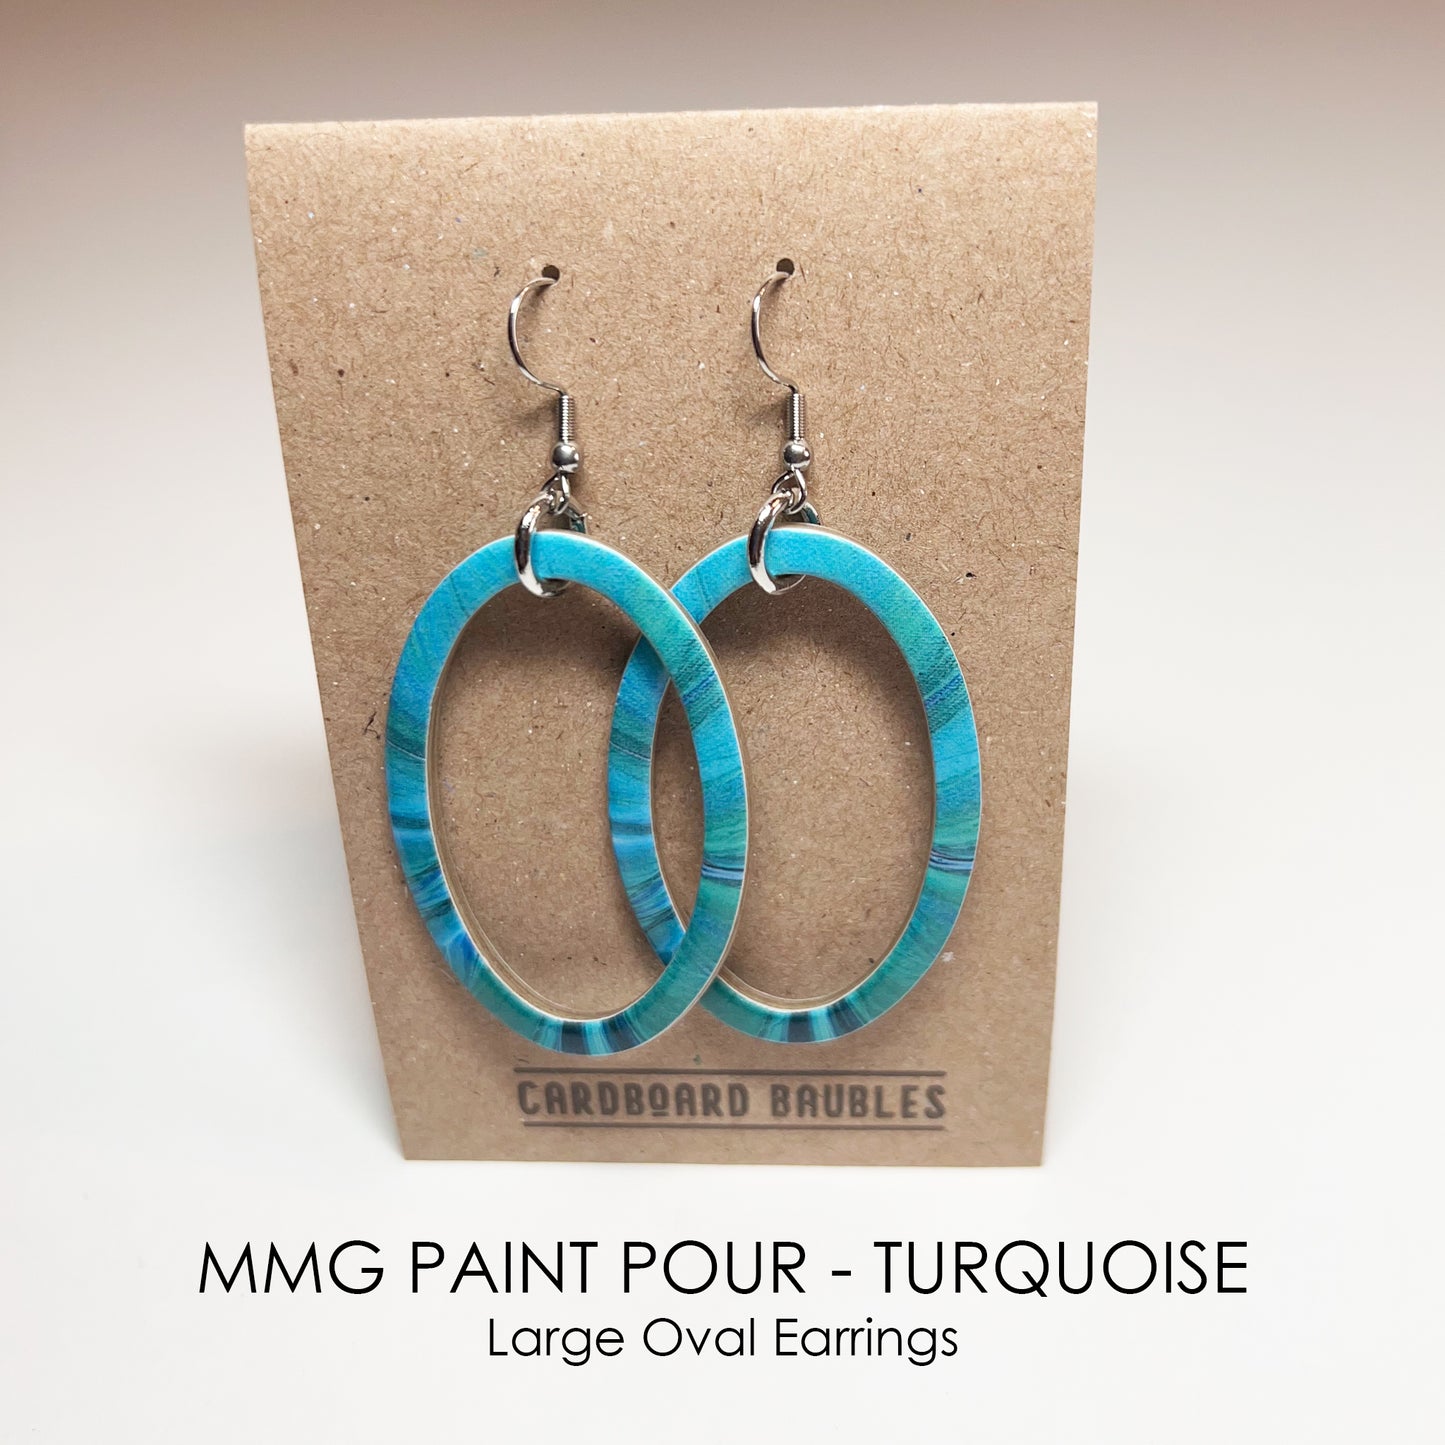 MMG PAINT POUR - TURQUOISE - Oval Cardboard Baubles Earrings